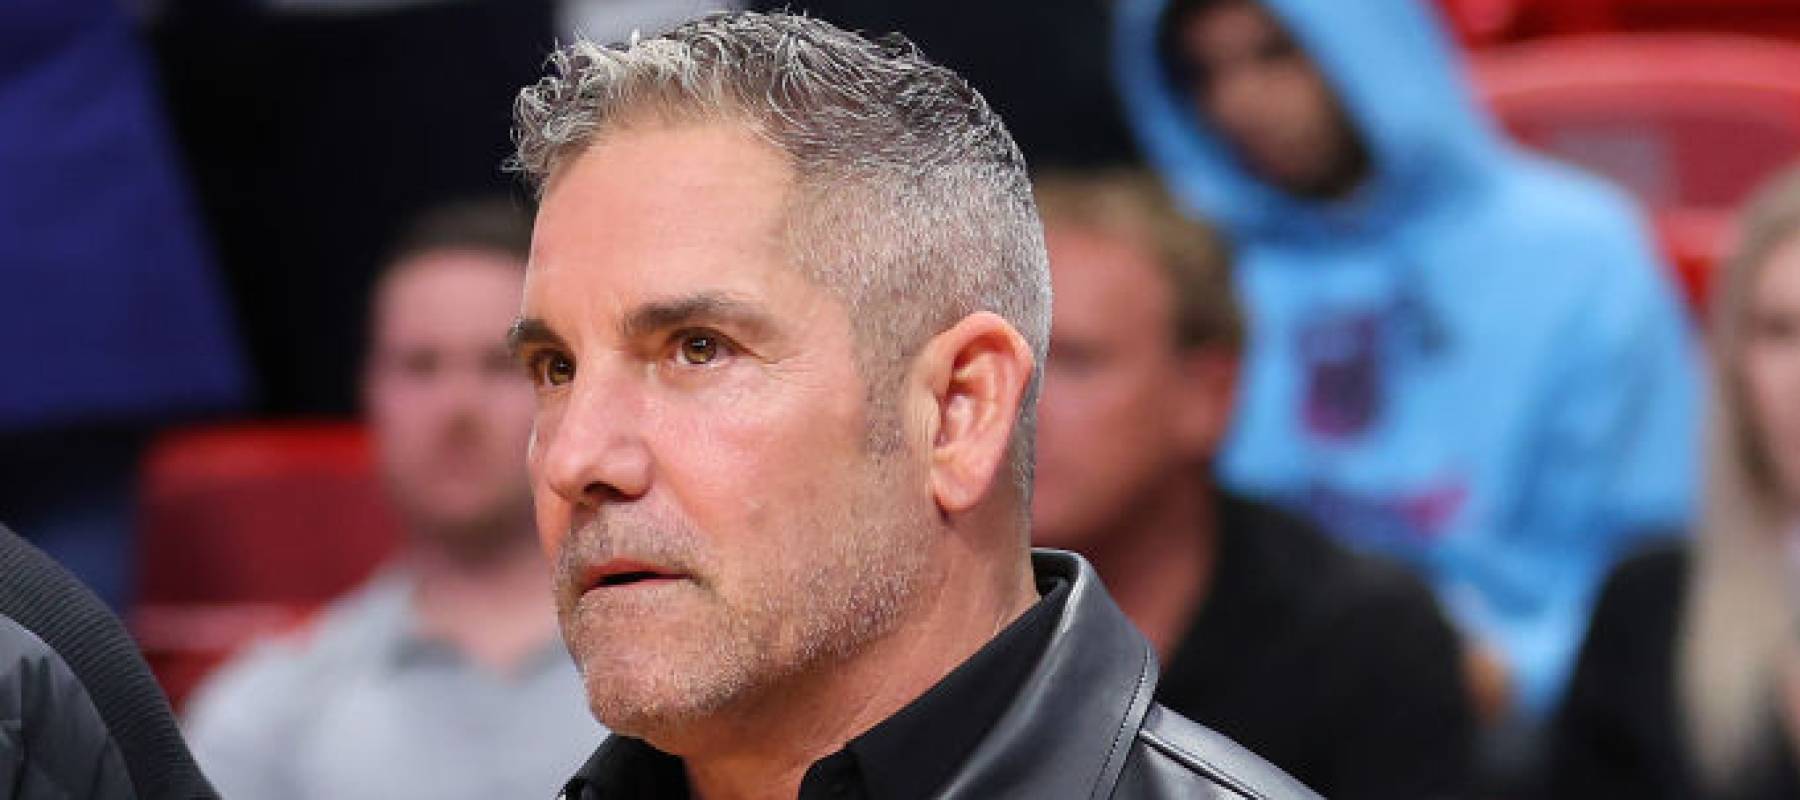 Grant Cardone sits in the front row at a basketball game, looking serious and leaning forward.